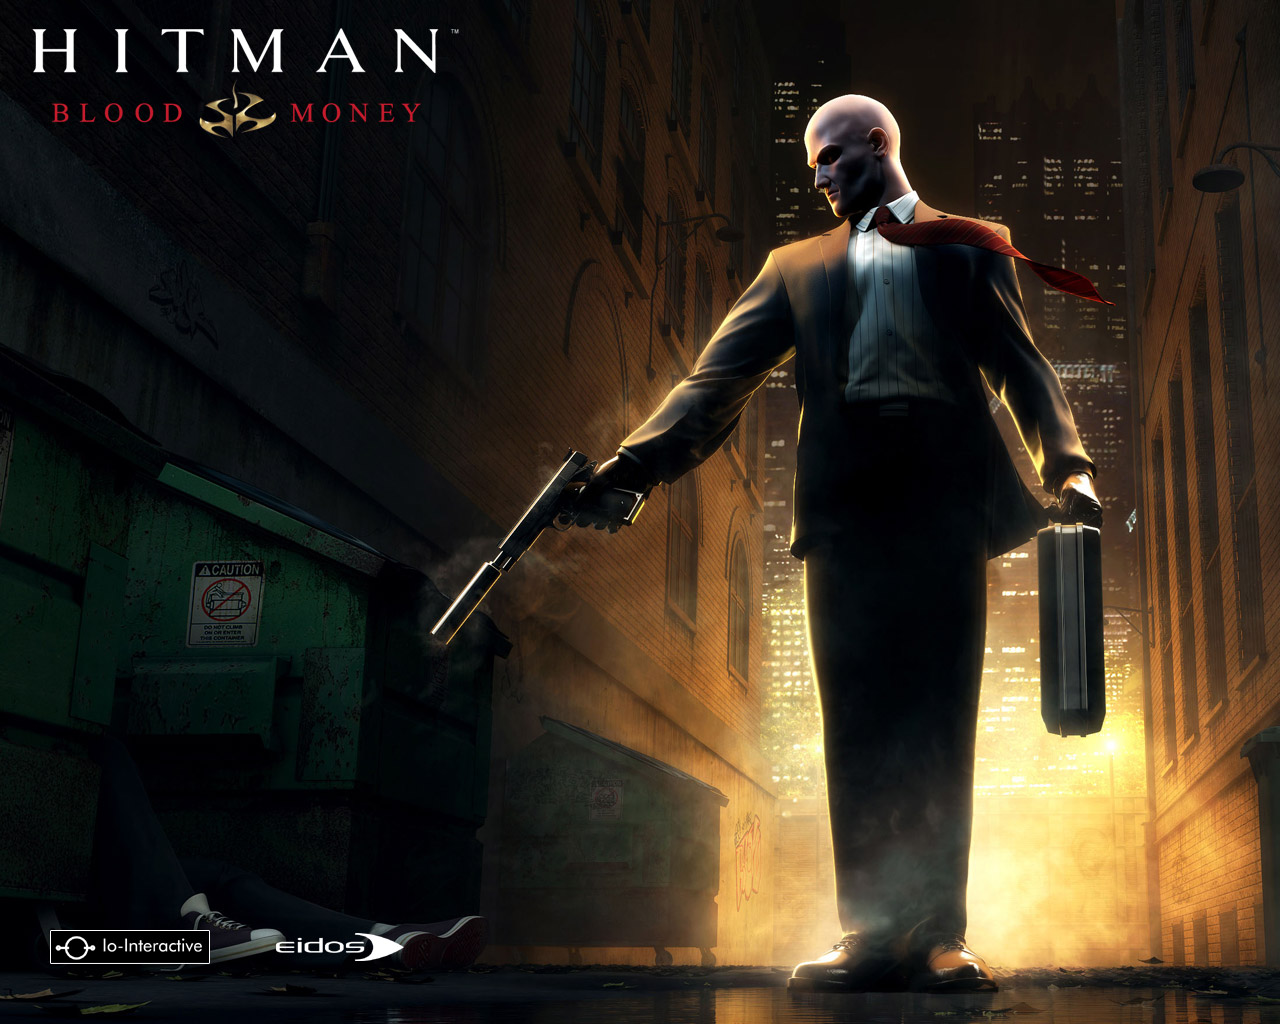 HD Hitman: Blood Money Android Images